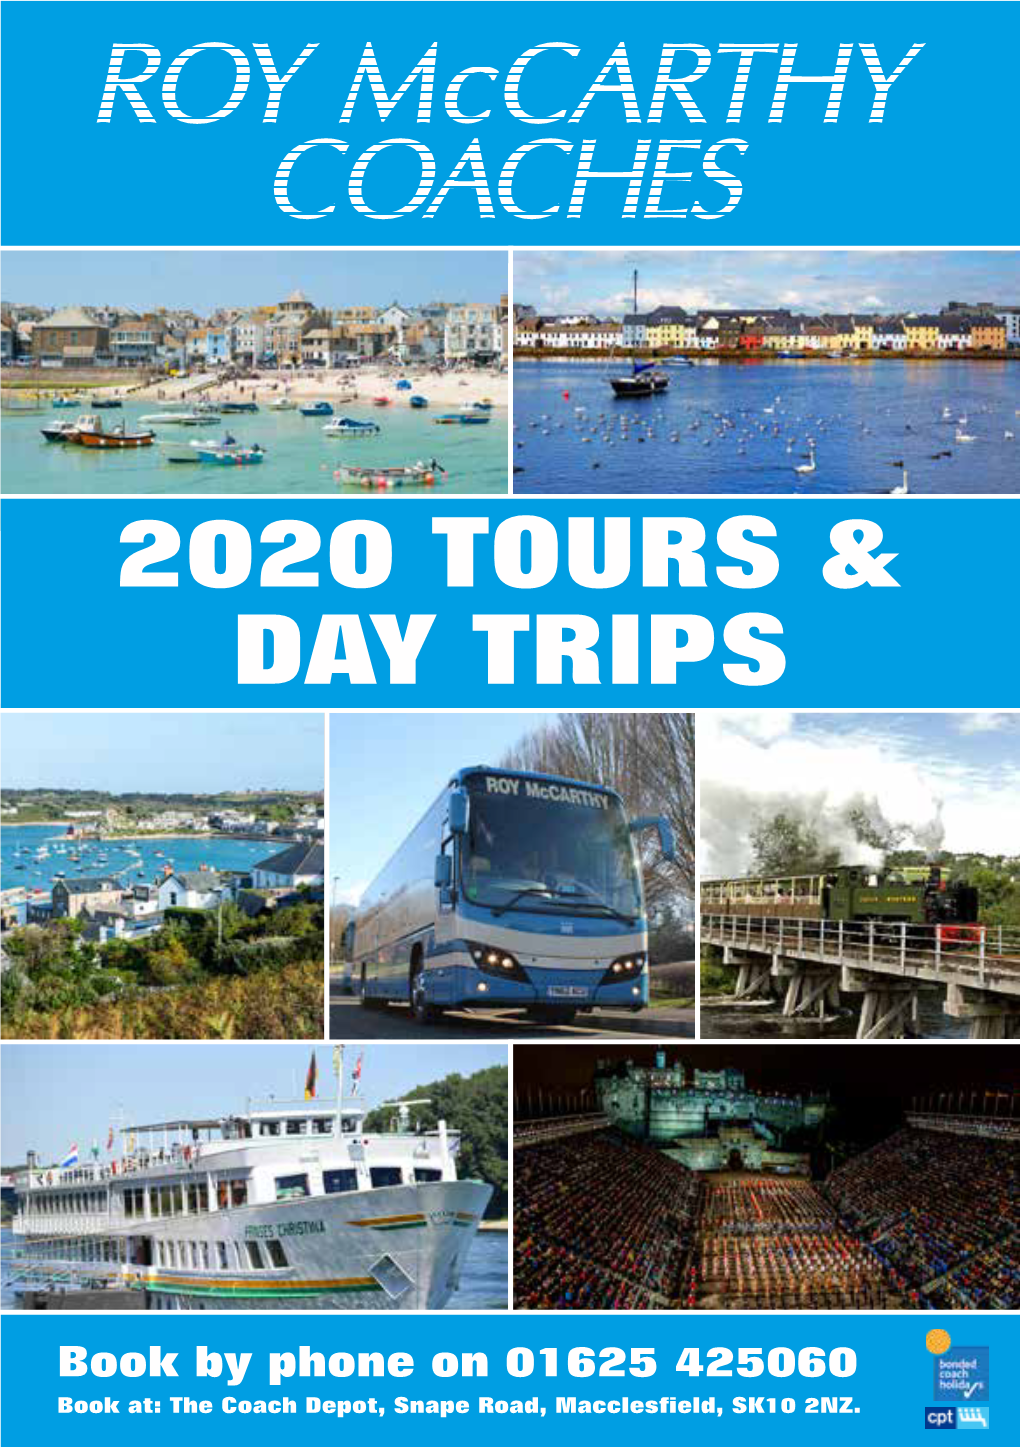 2020 Tours & Day Trips